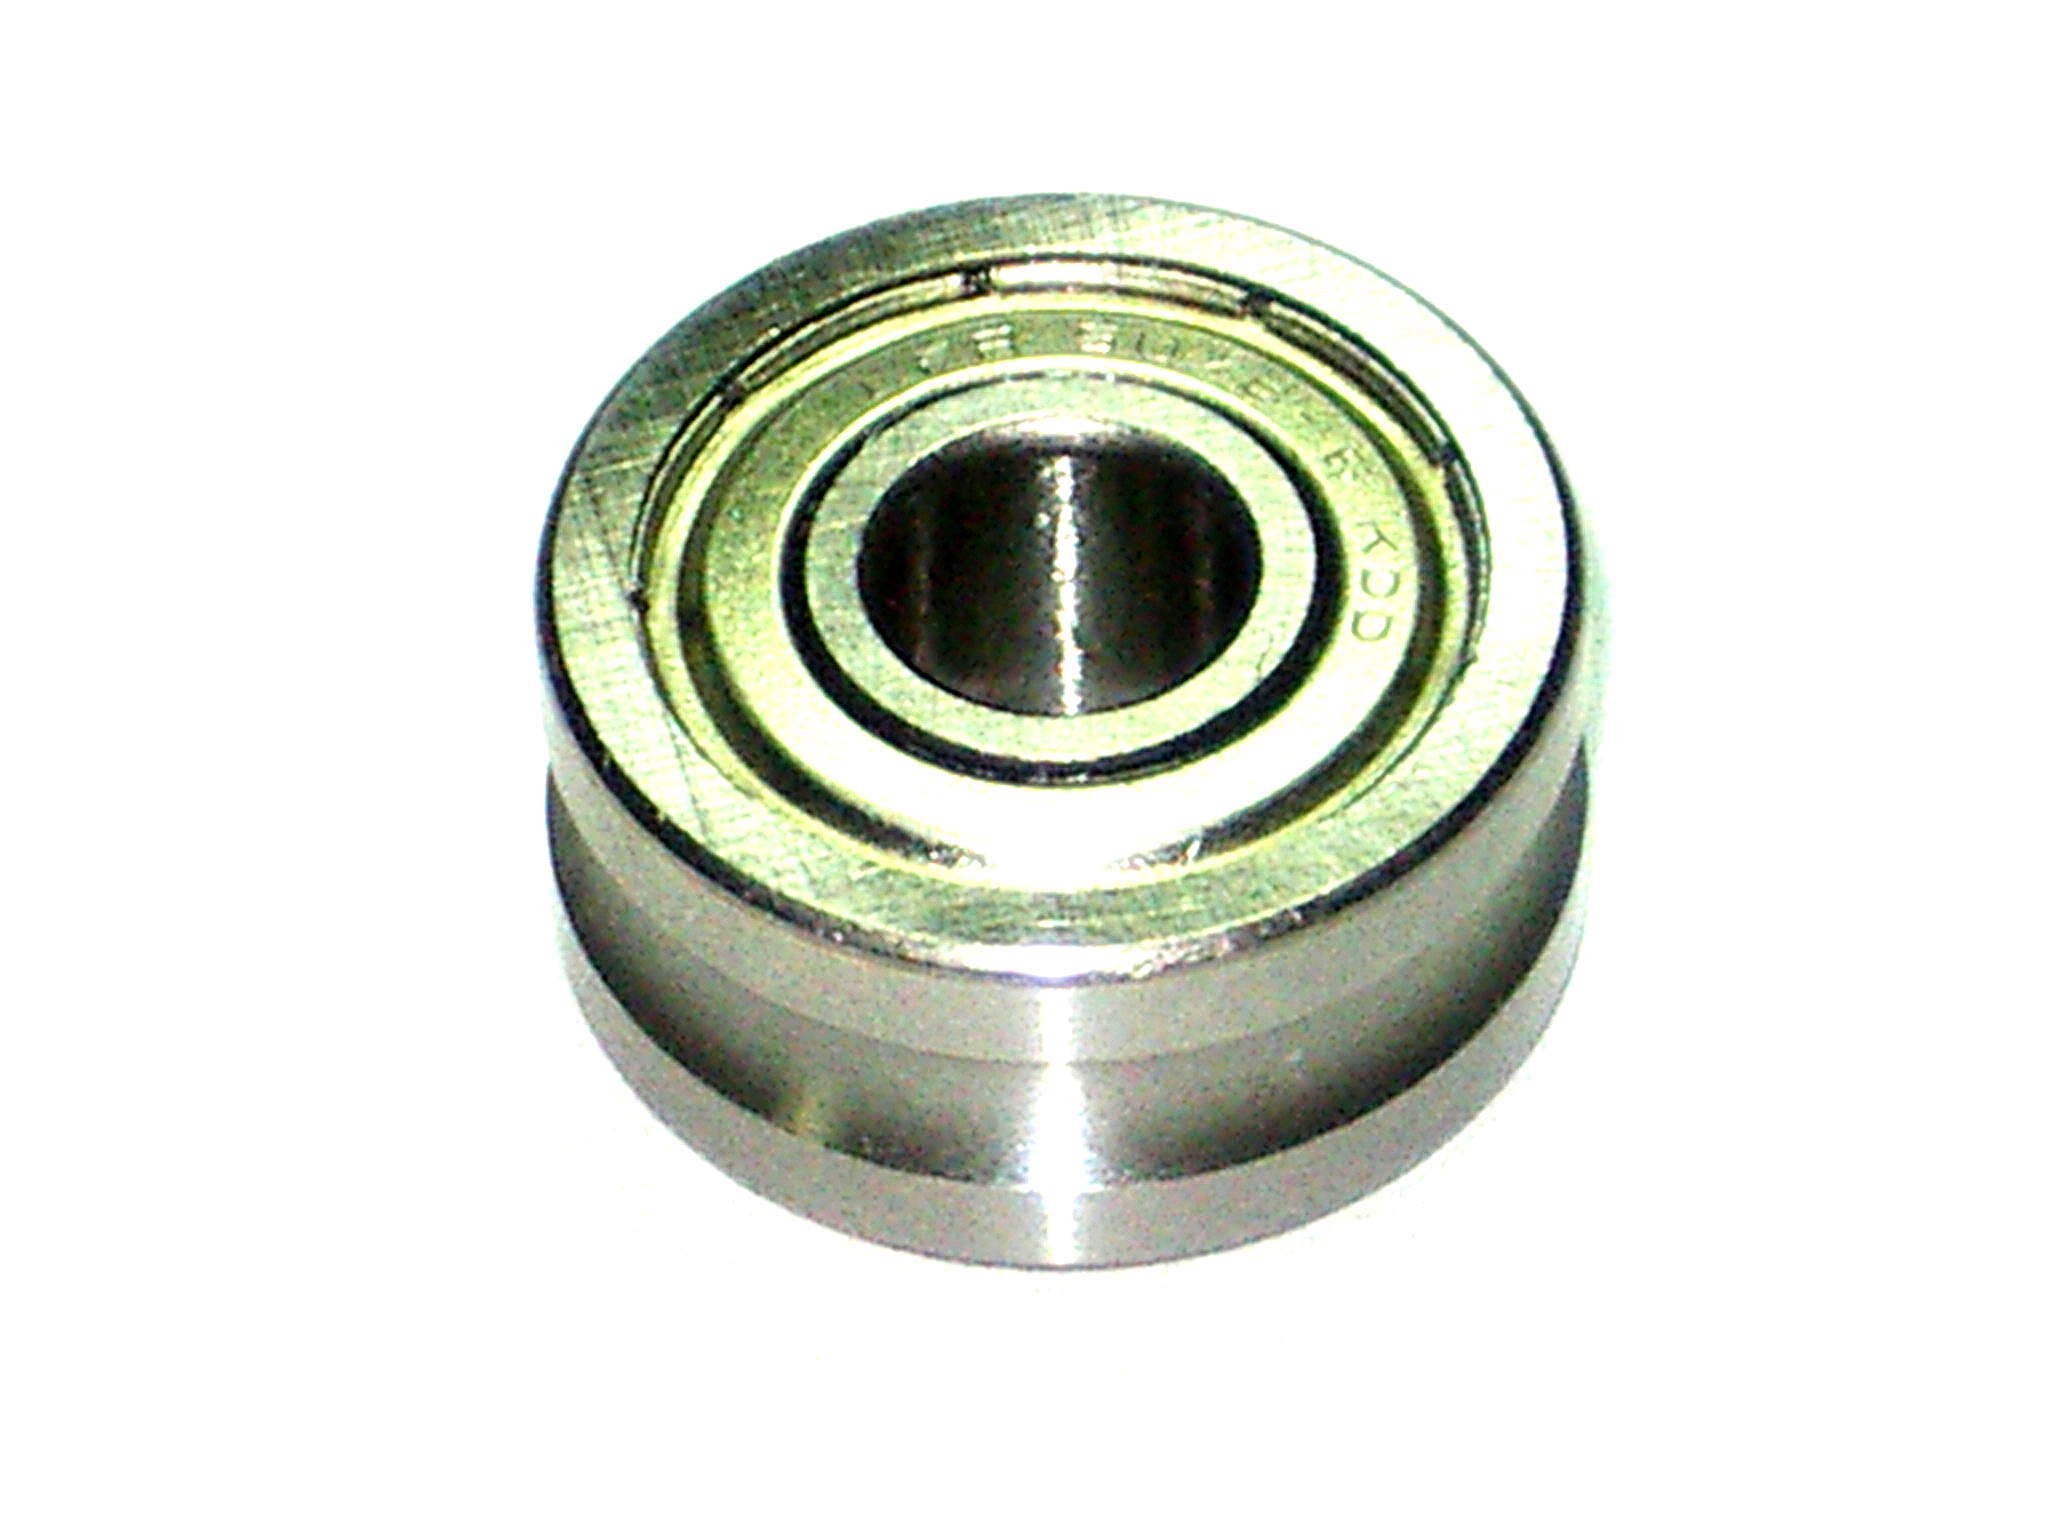 Bearing LFR50/8NPP 24 x 8 x 11 with groove for 6mm Shaft